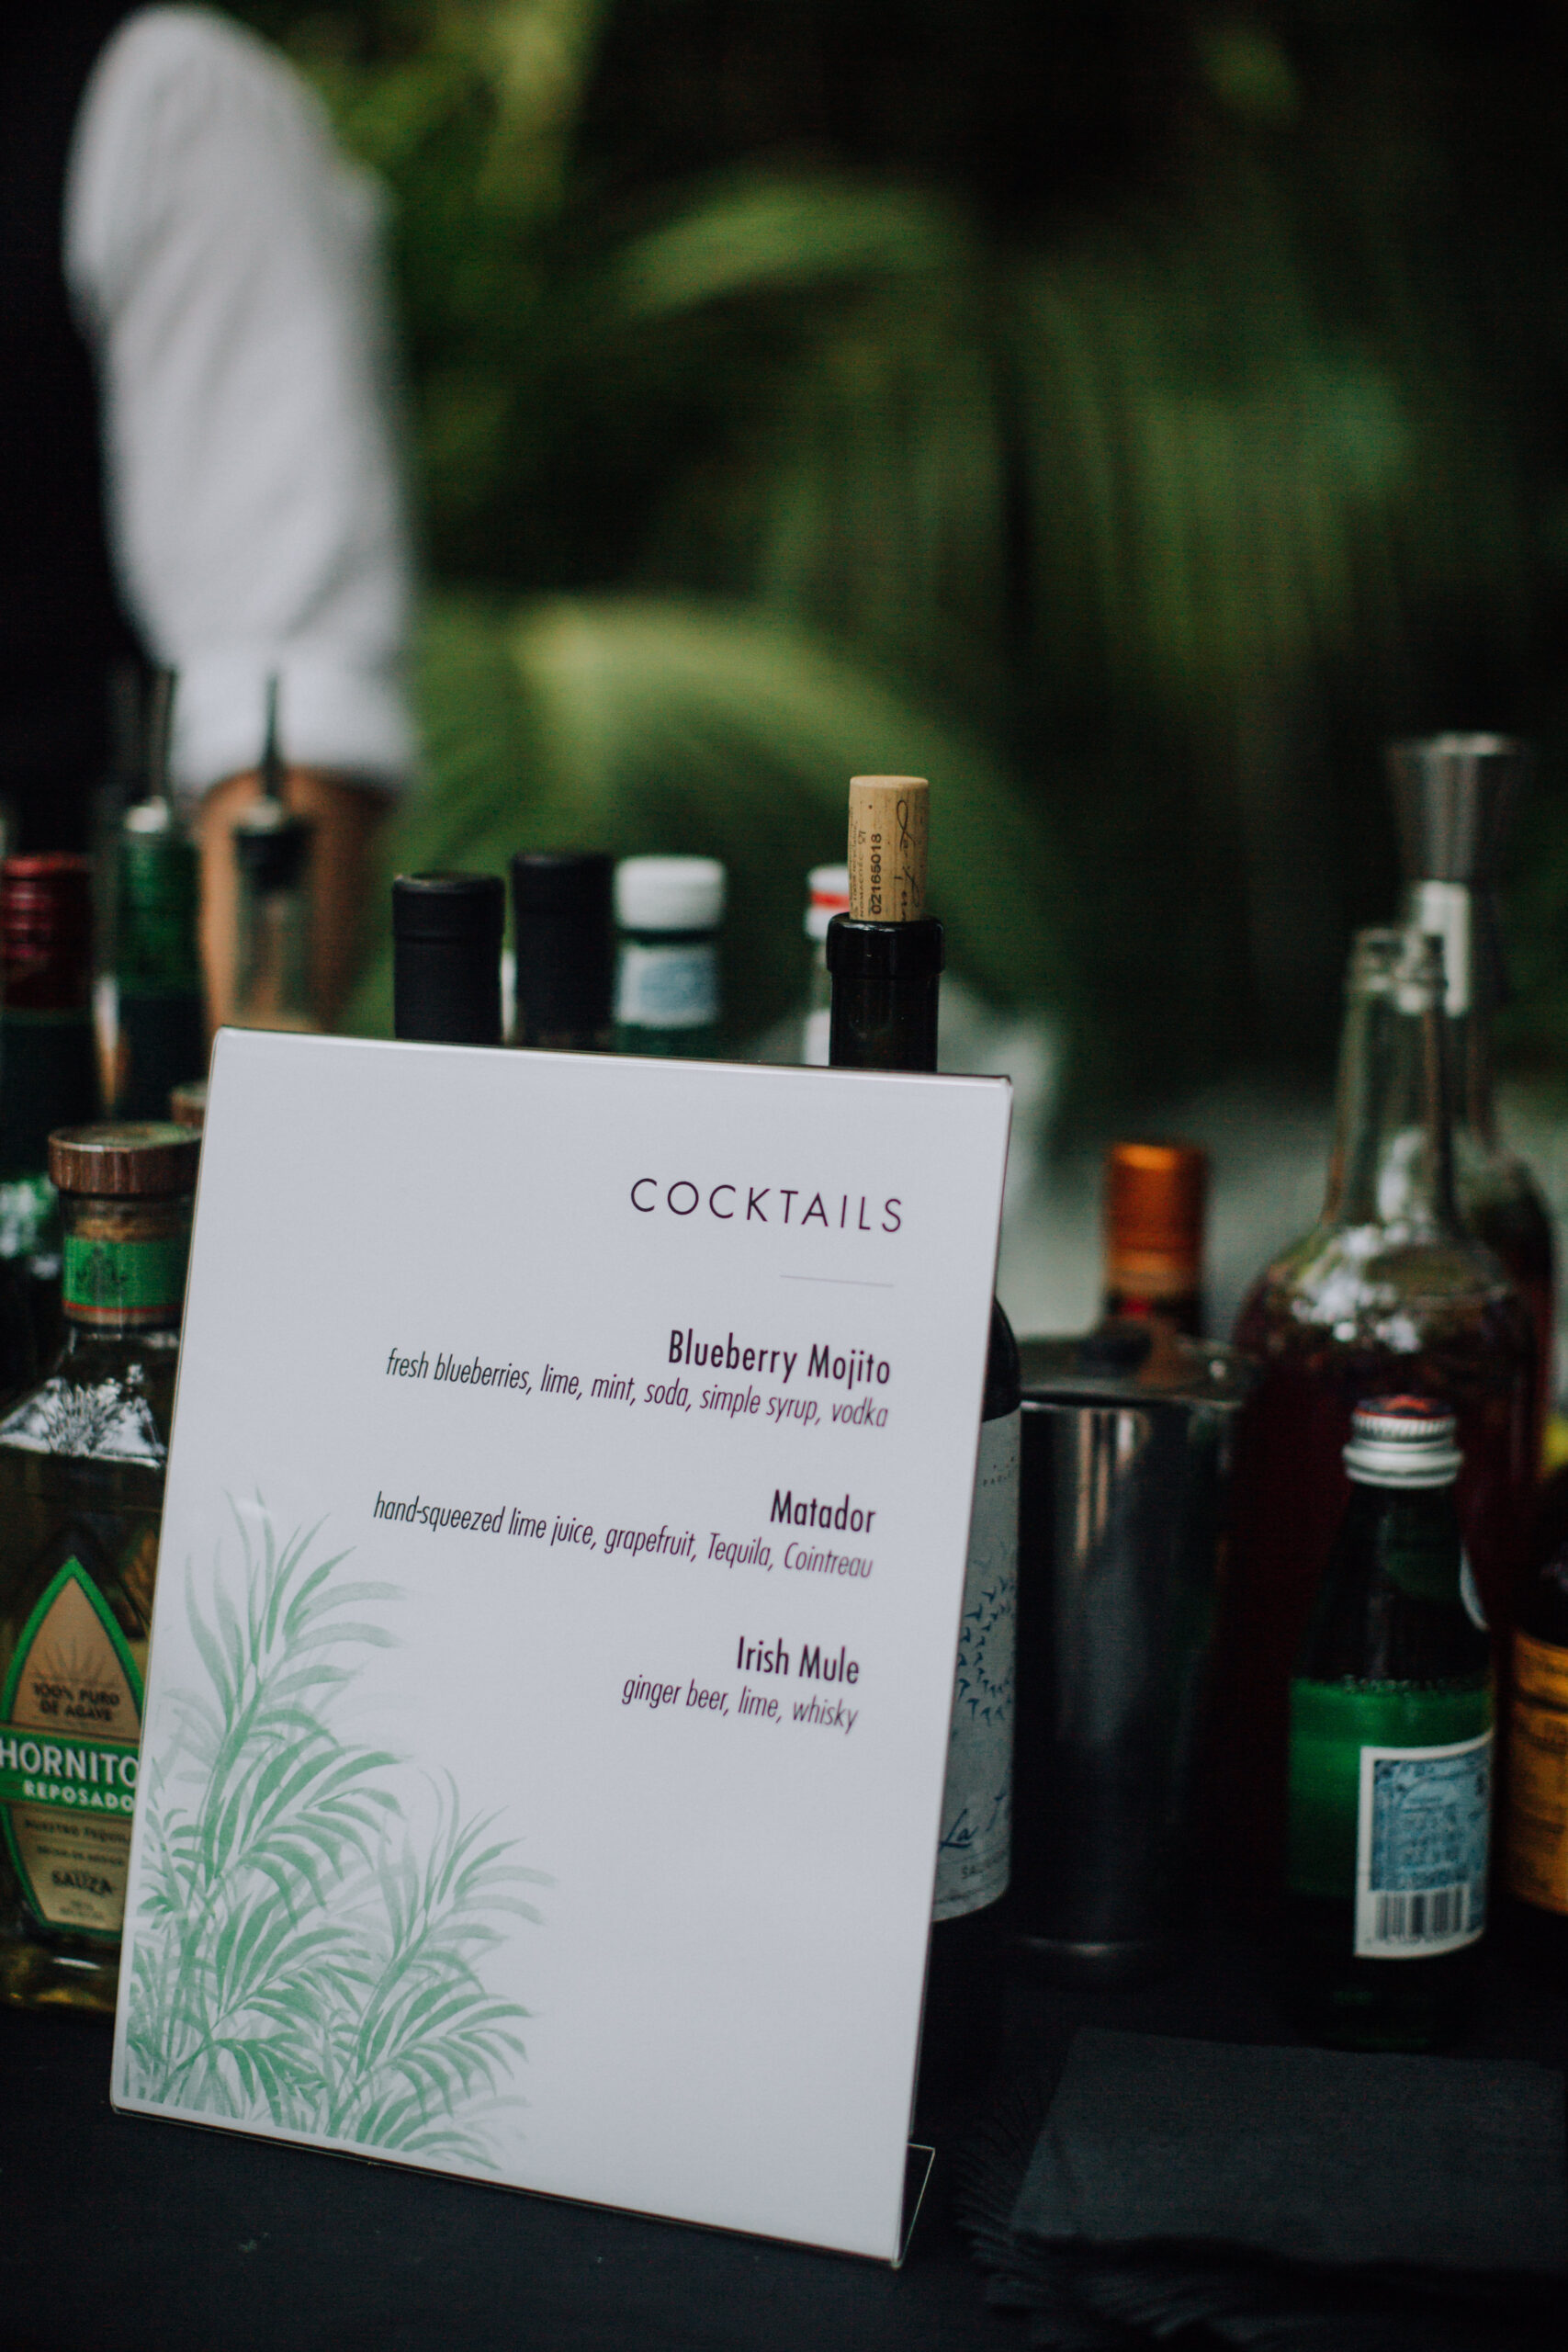 cocktail hour menu with the bottles in the background